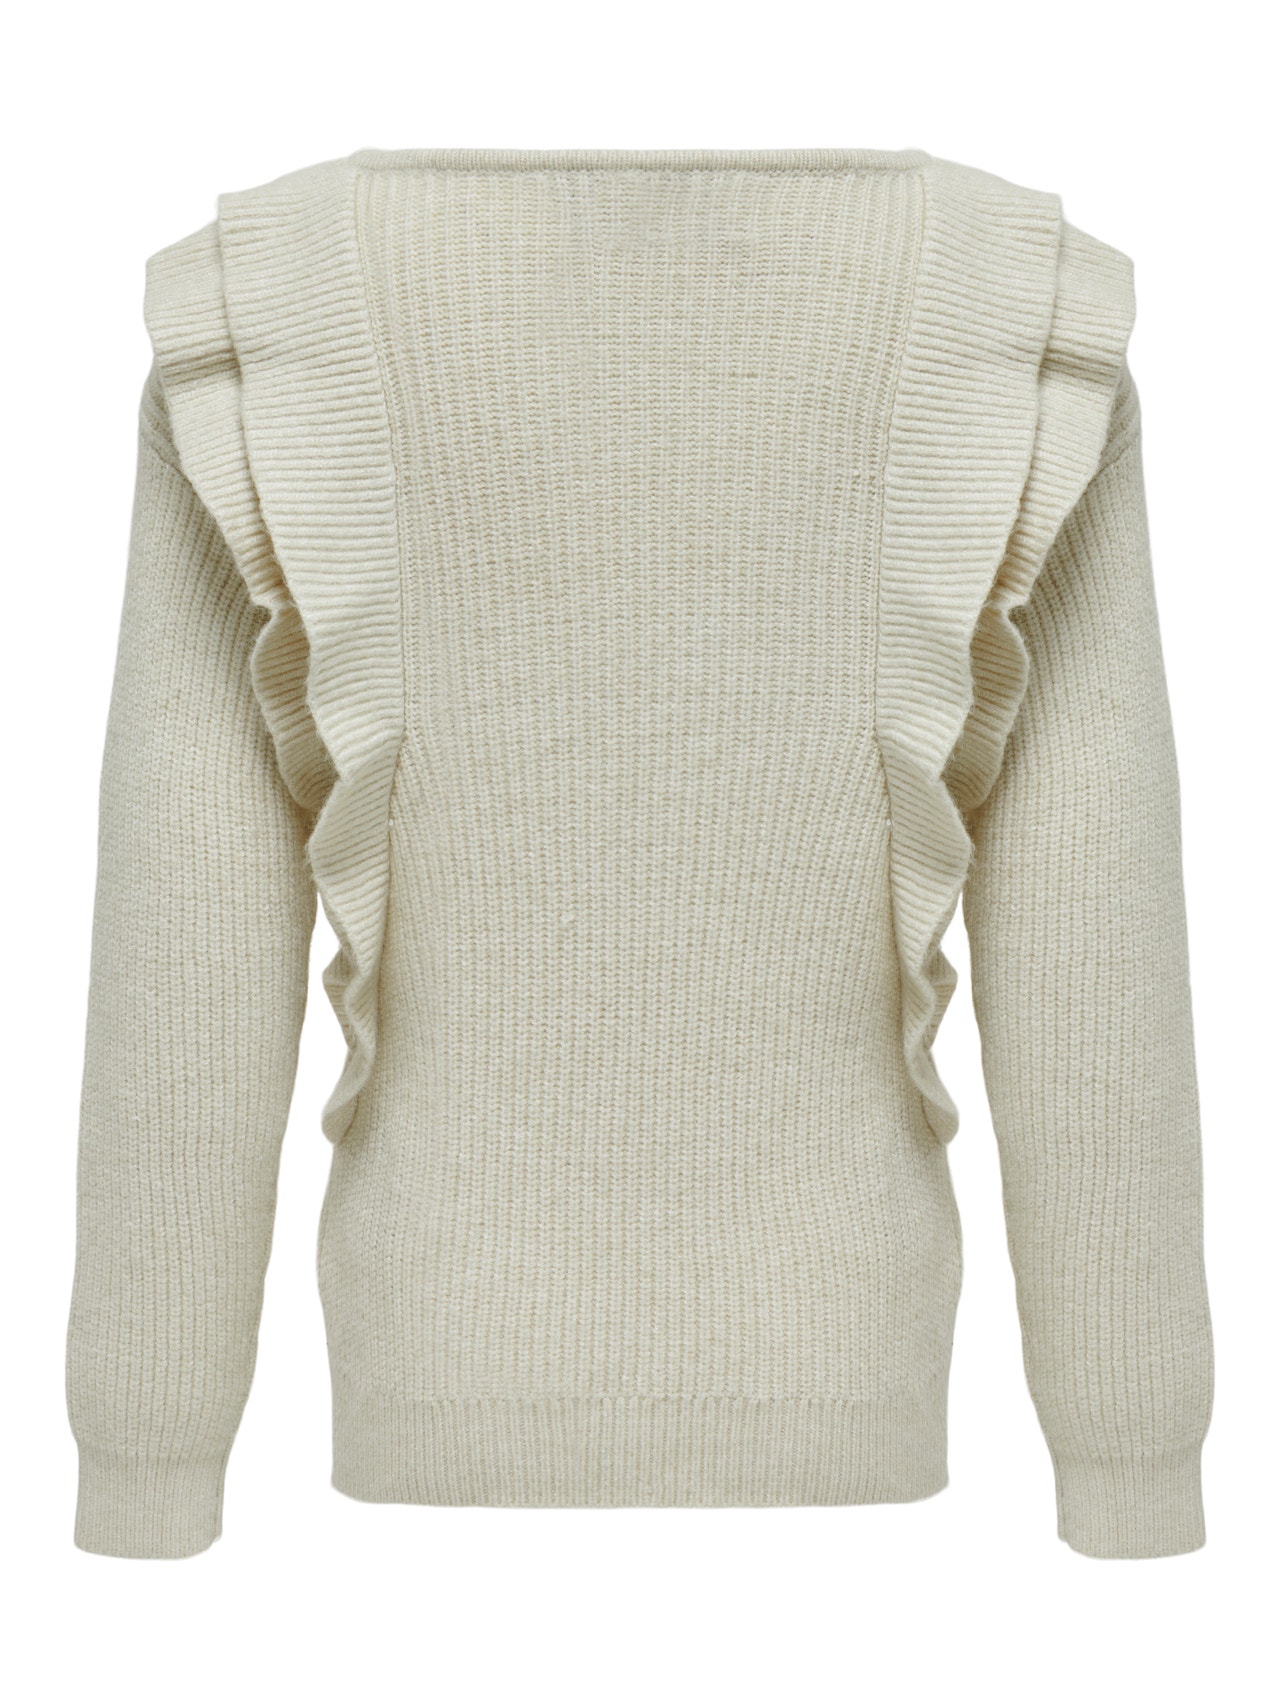 ONLY Normal passform V-ringning Pullover -Pumice Stone - 15276092